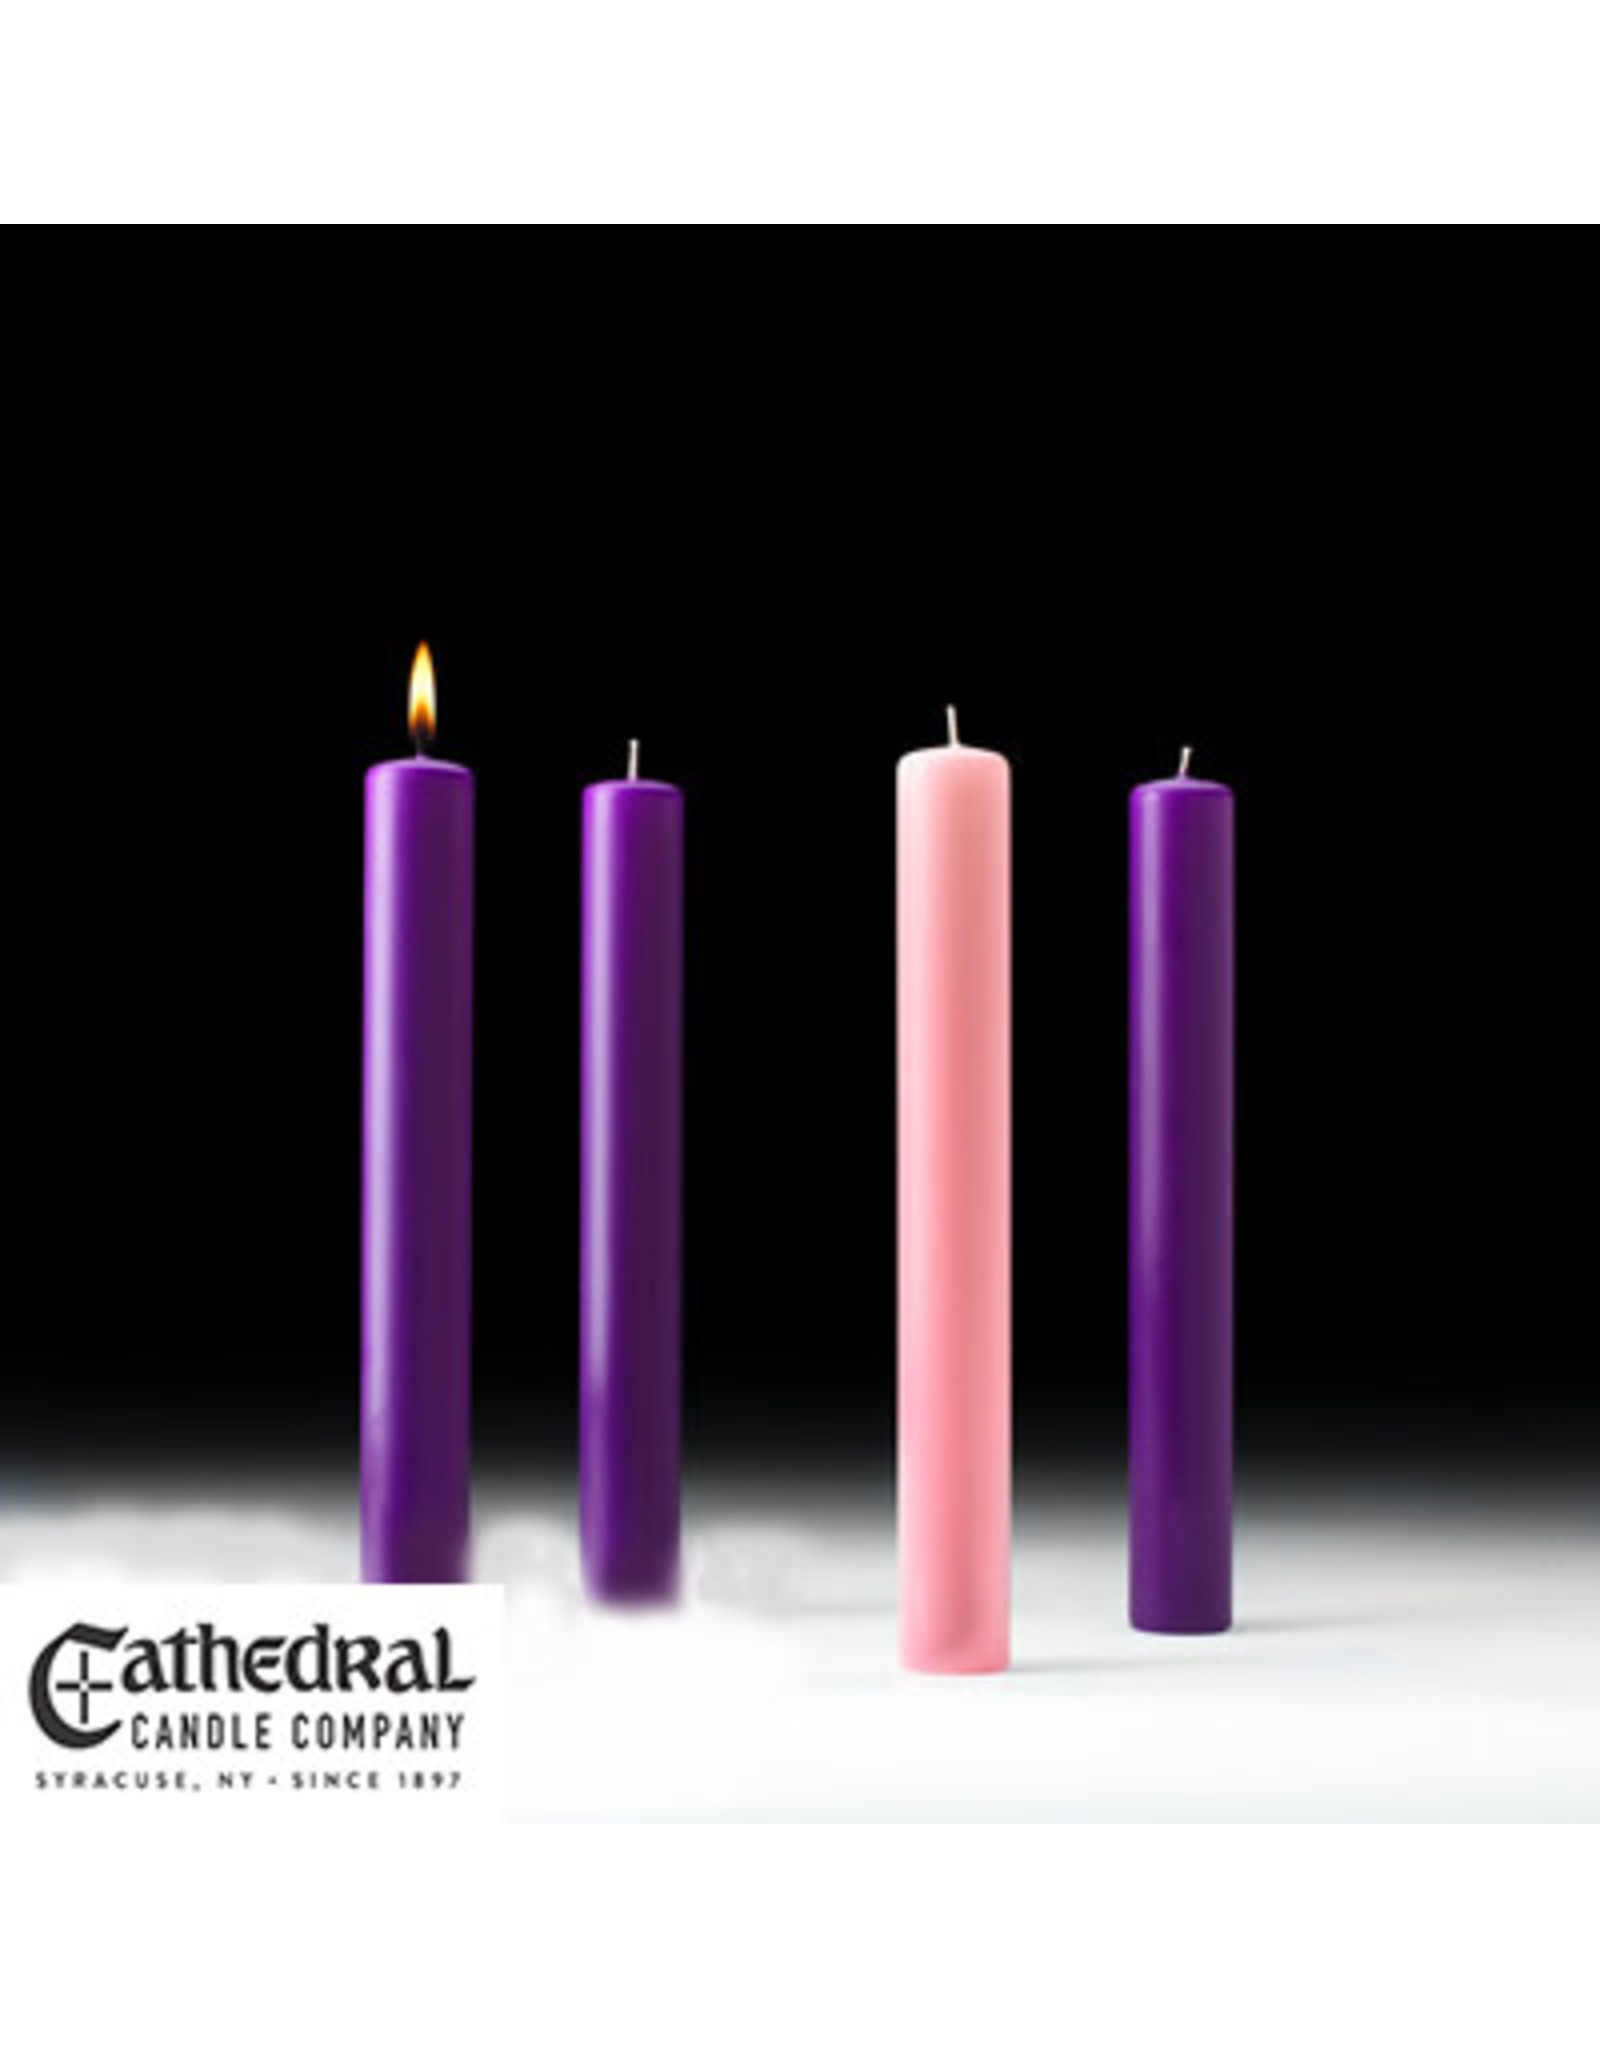 Cathedral Candle 51% Beeswax  Advent Candles 1.5x12 (3 Purple, 1 Rose)